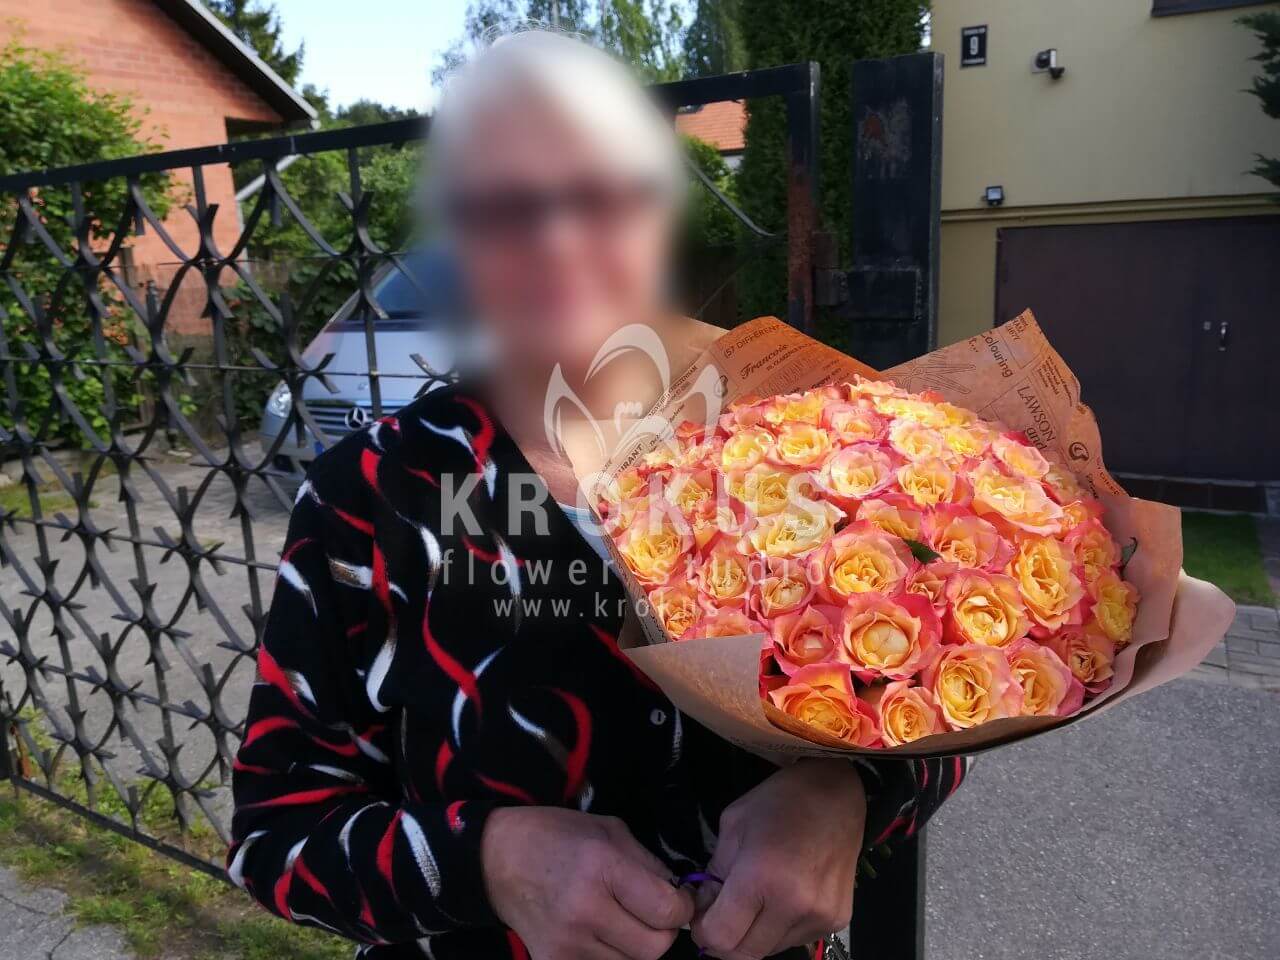 Deliver flowers to Kalngale (yellow rosesorange roses)